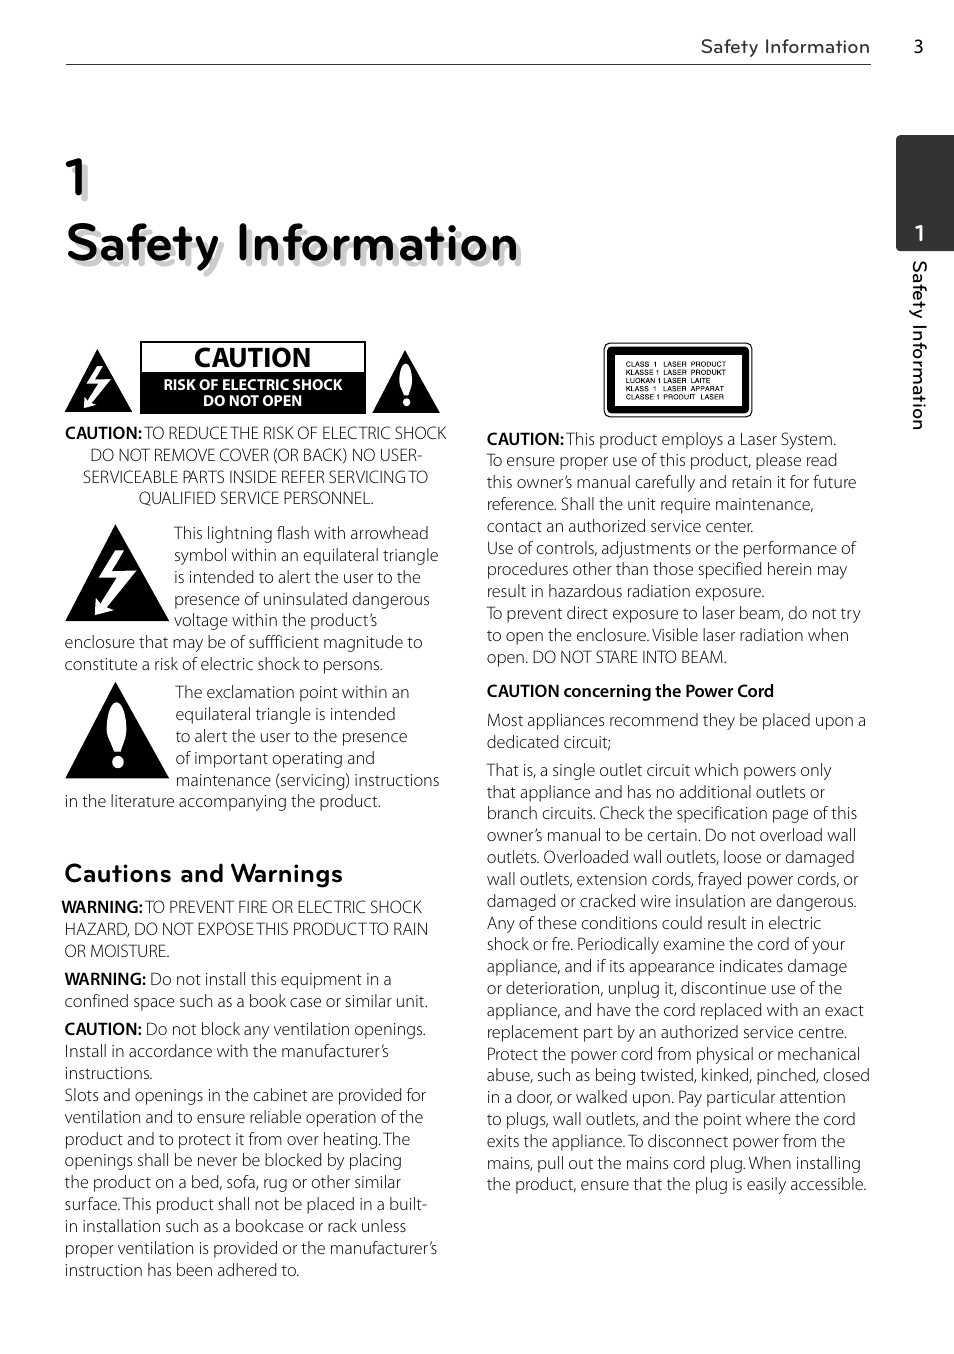 1 safety information, Caution, Cautions and warnings | LG BD678N User Manual | Page 3 / 72